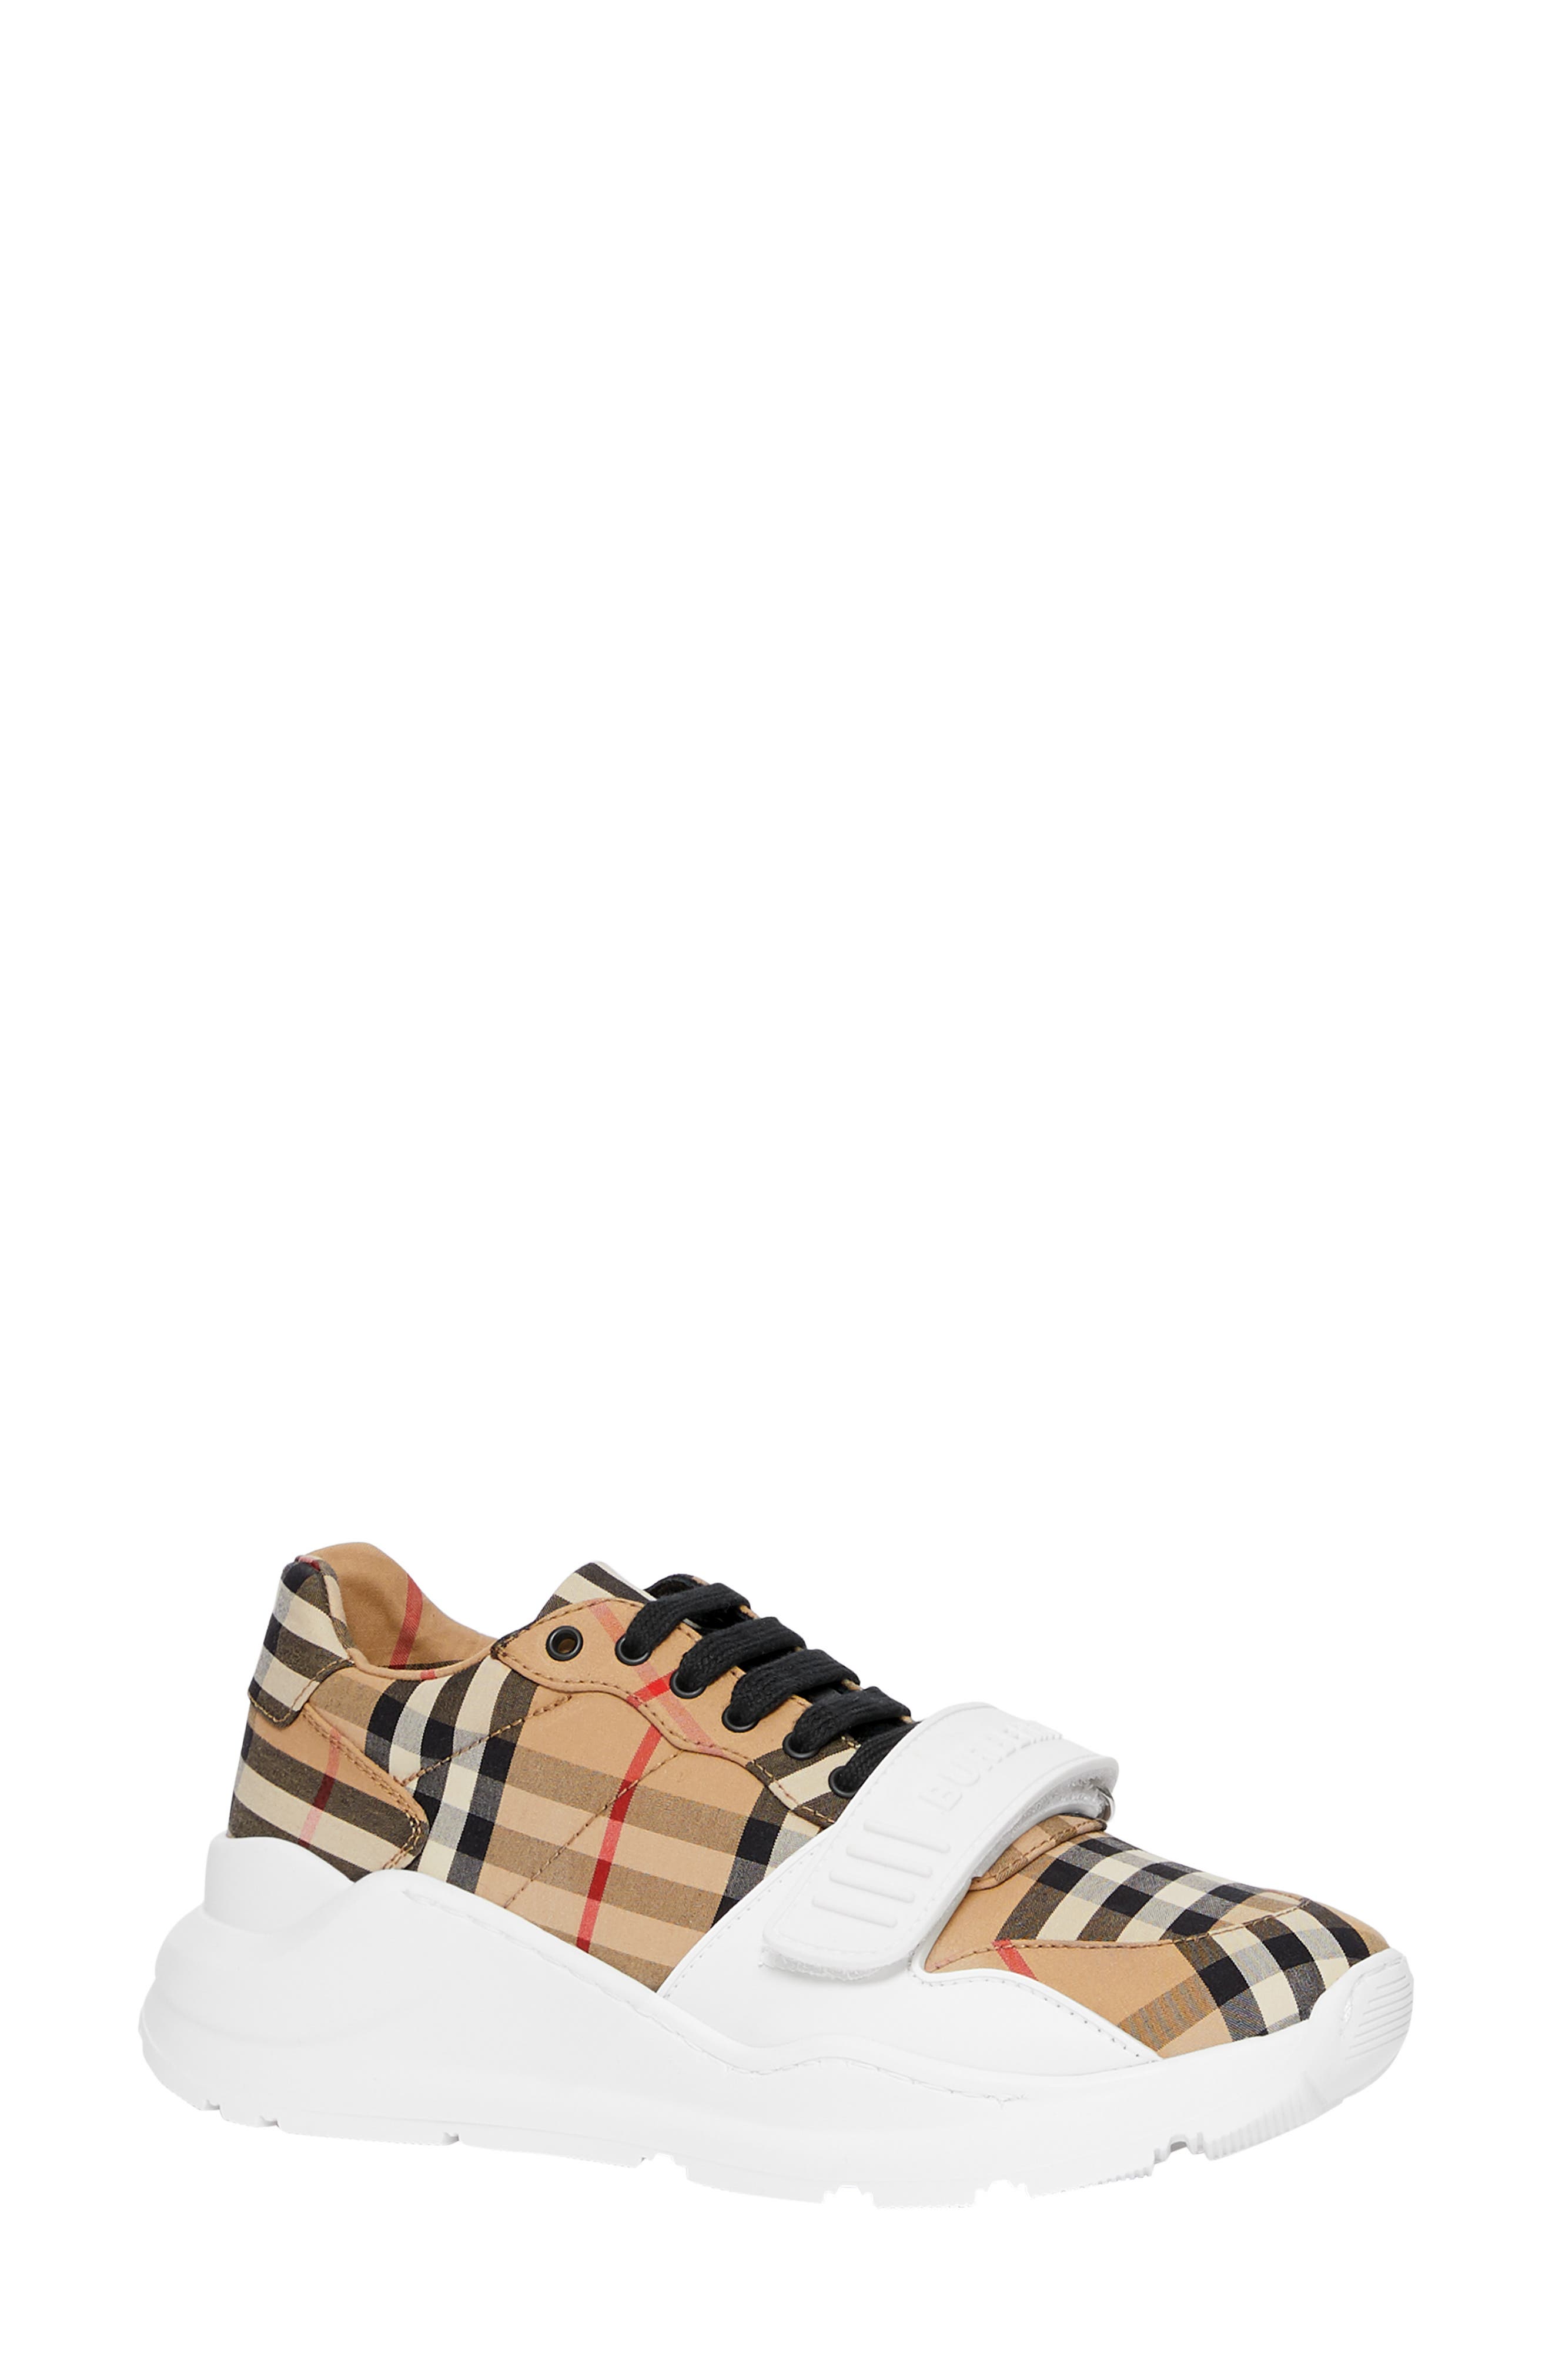 burberry running shoes